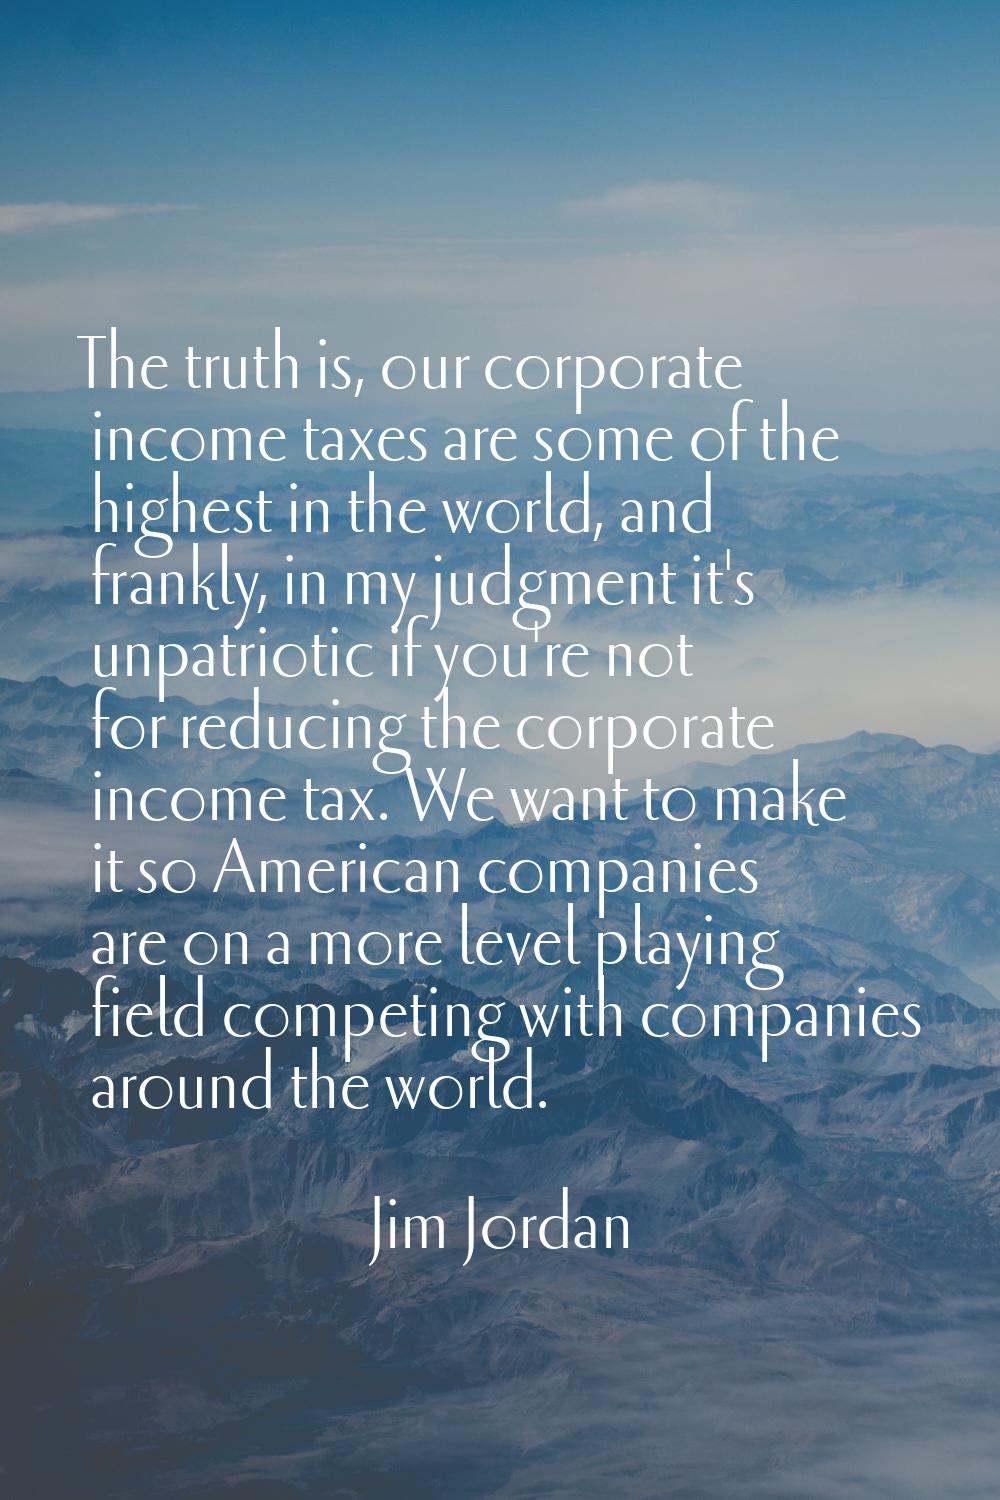 The truth is, our corporate income taxes are some of the highest in the world, and frankly, in my j